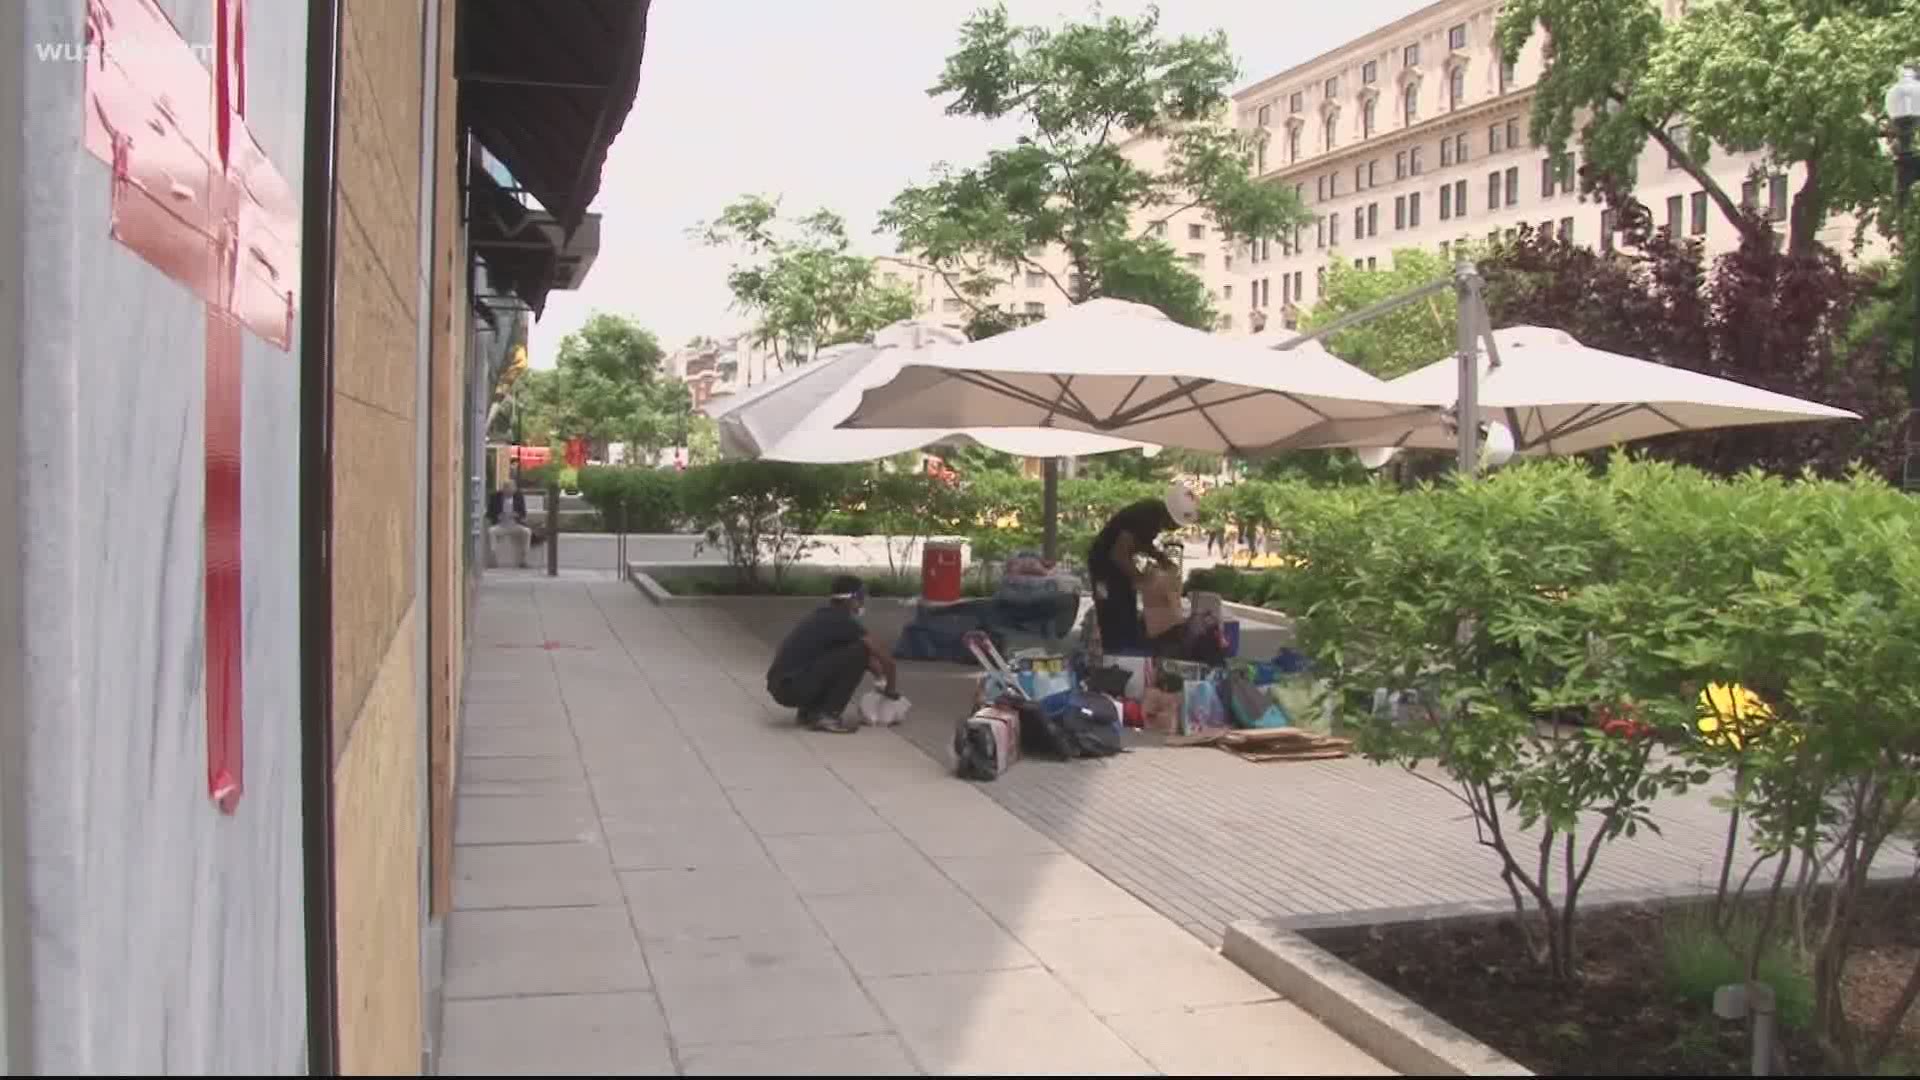 The city is expecting "massive crowds" downtown Saturday and many are showing up to provide medical aid, food, water and supplies for protesters.